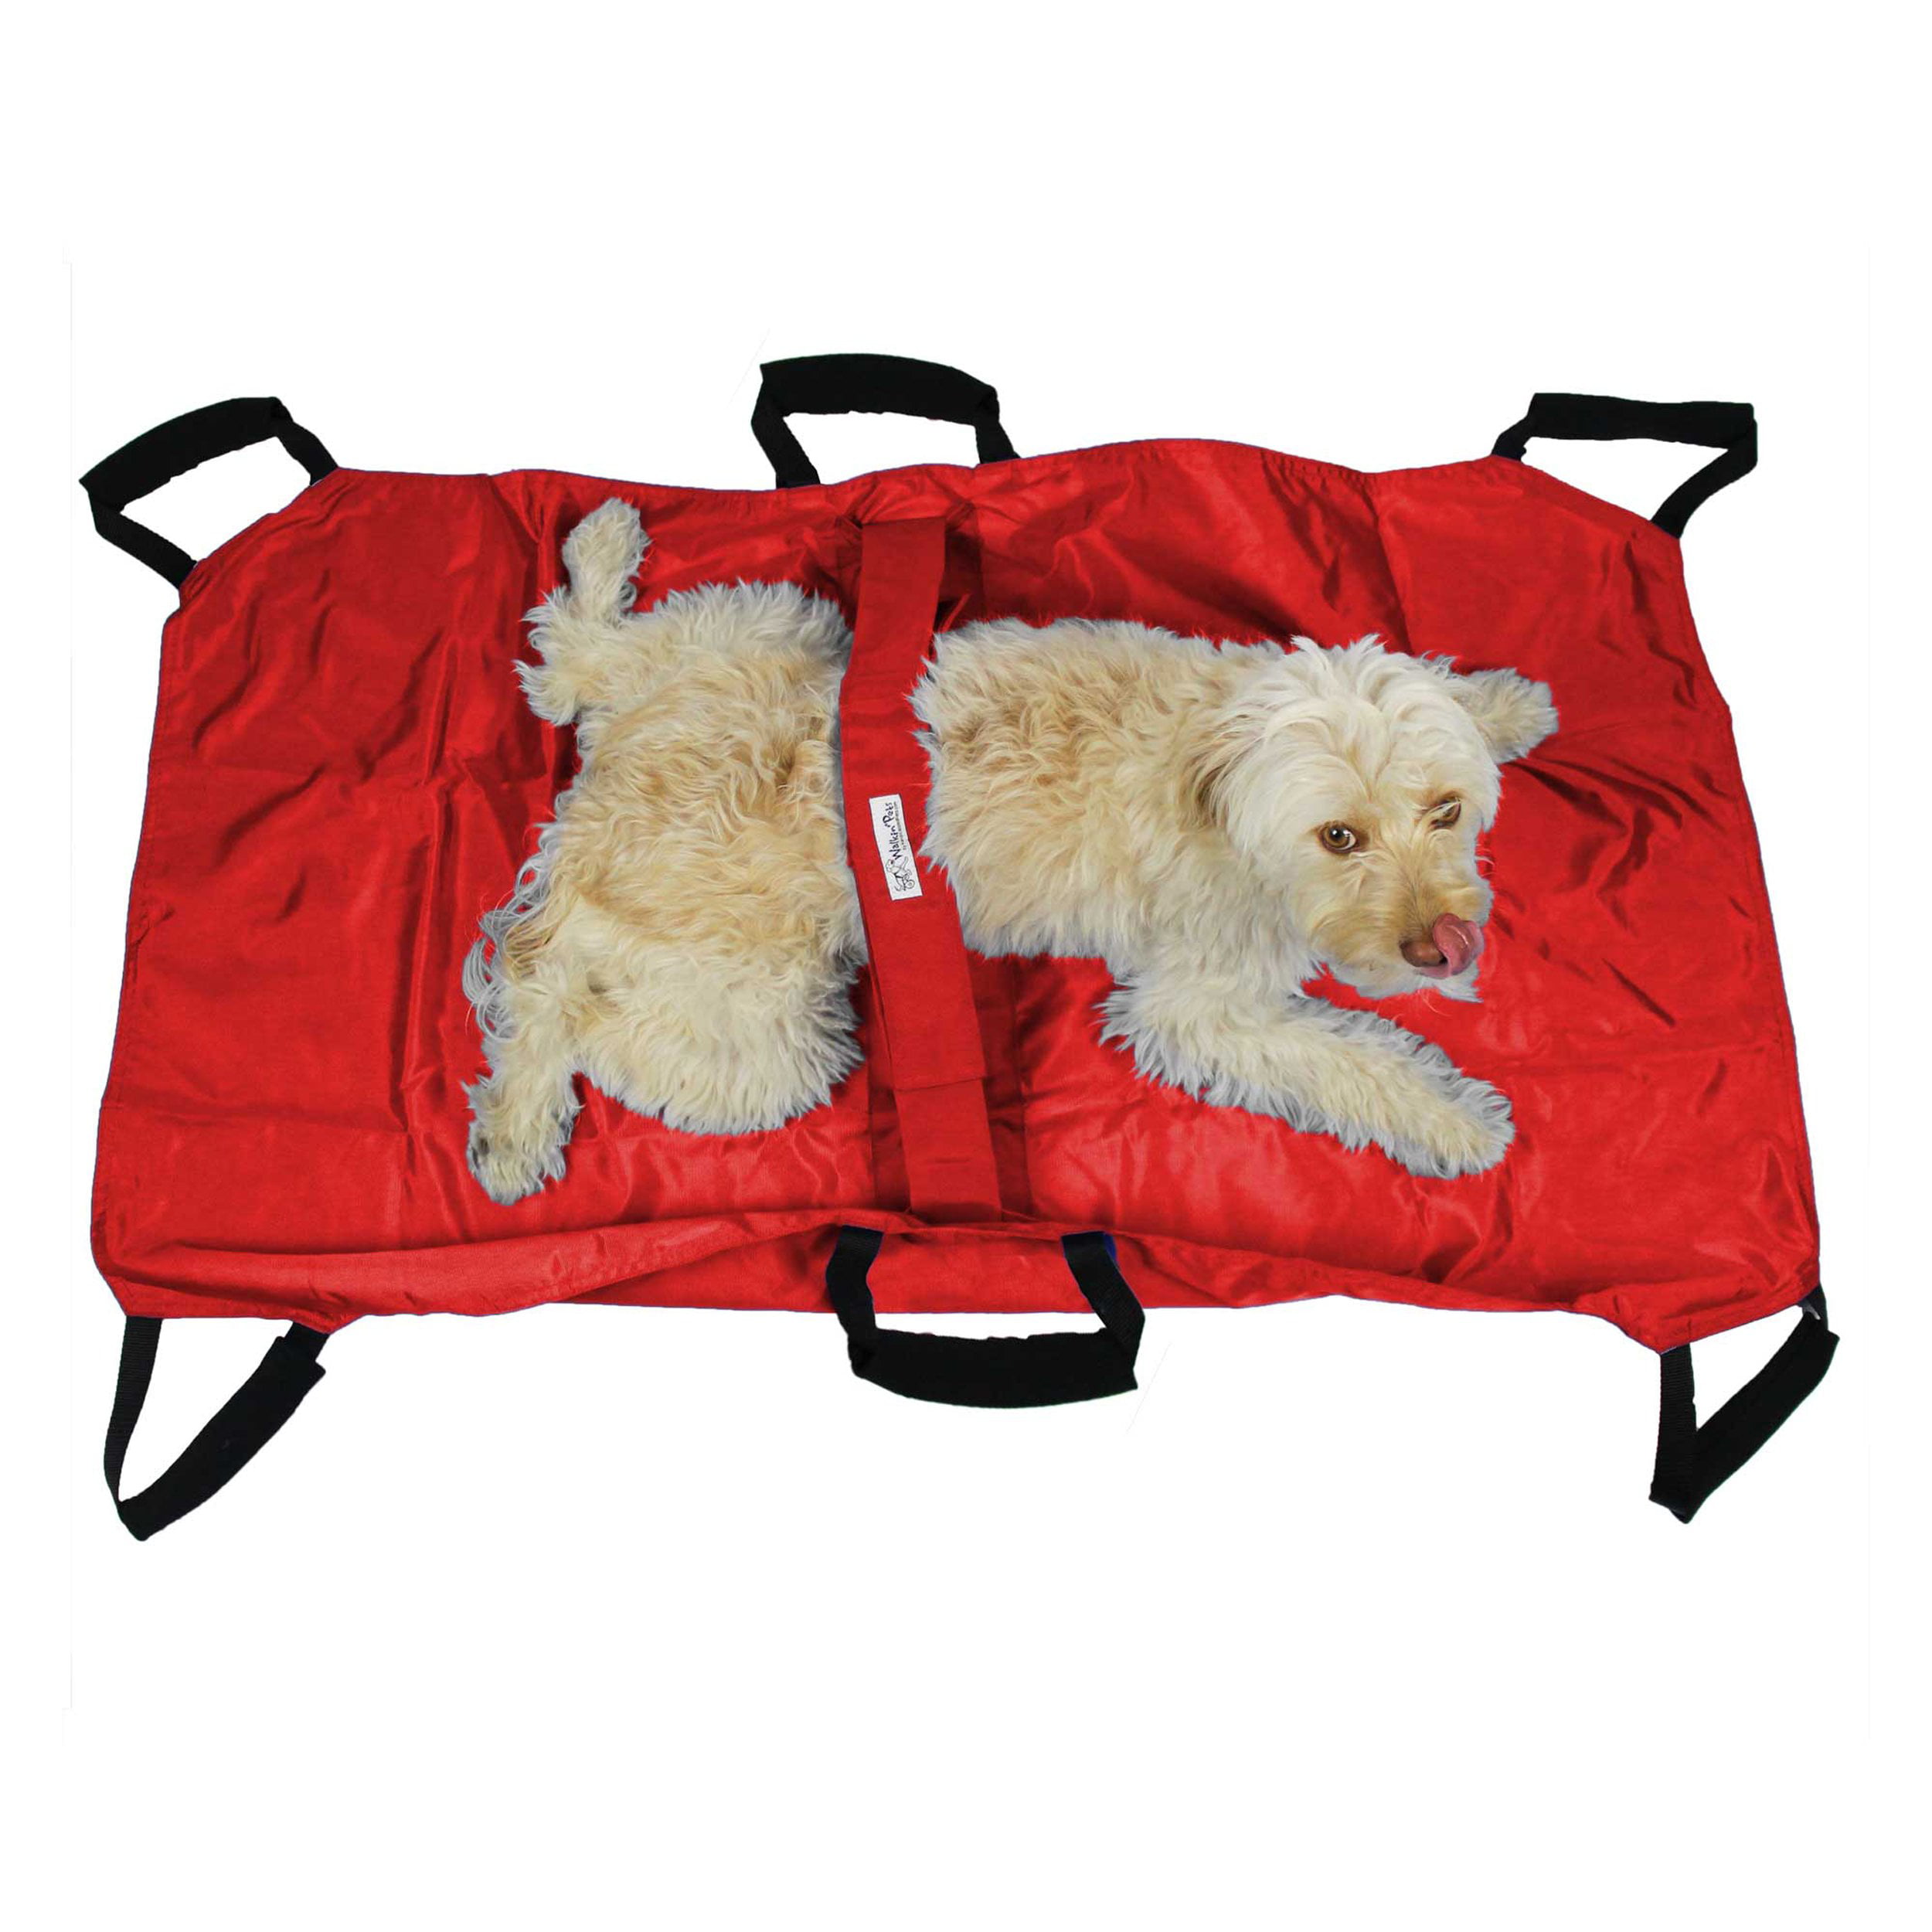 Walkin' Transport Stretcher for Dogs | Emergency Animal Carrier with ...